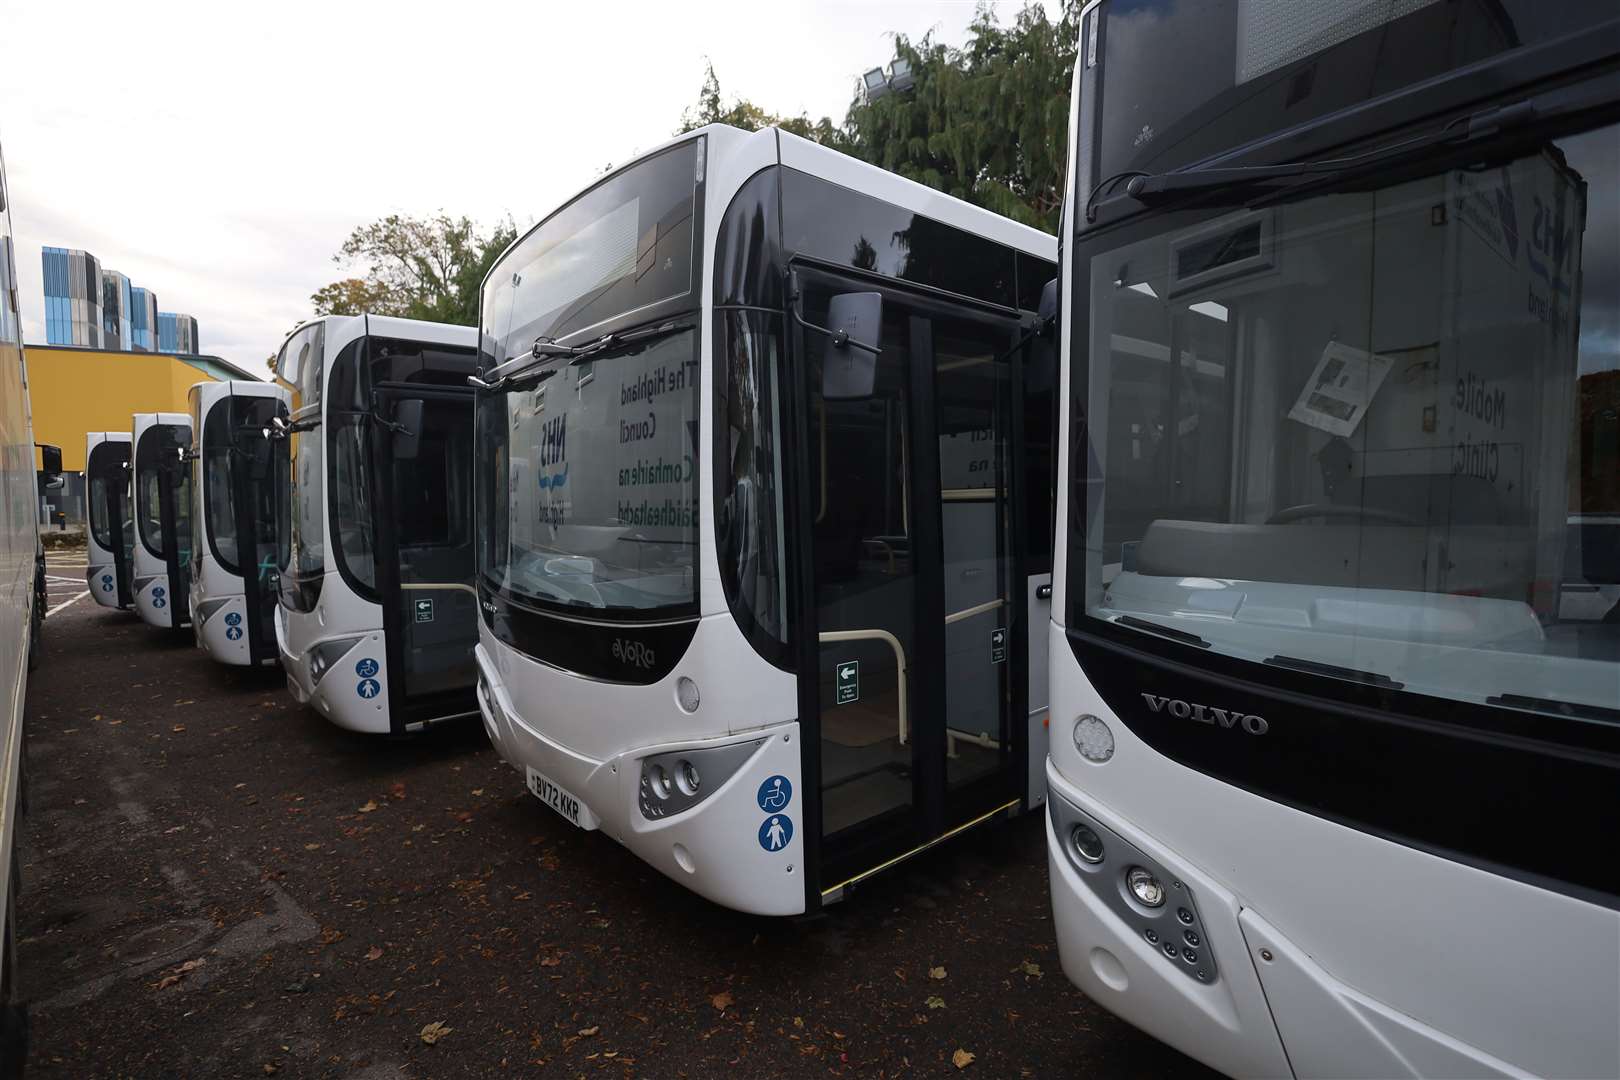 An in-house bus service, run by Highland Council, could be expanded.